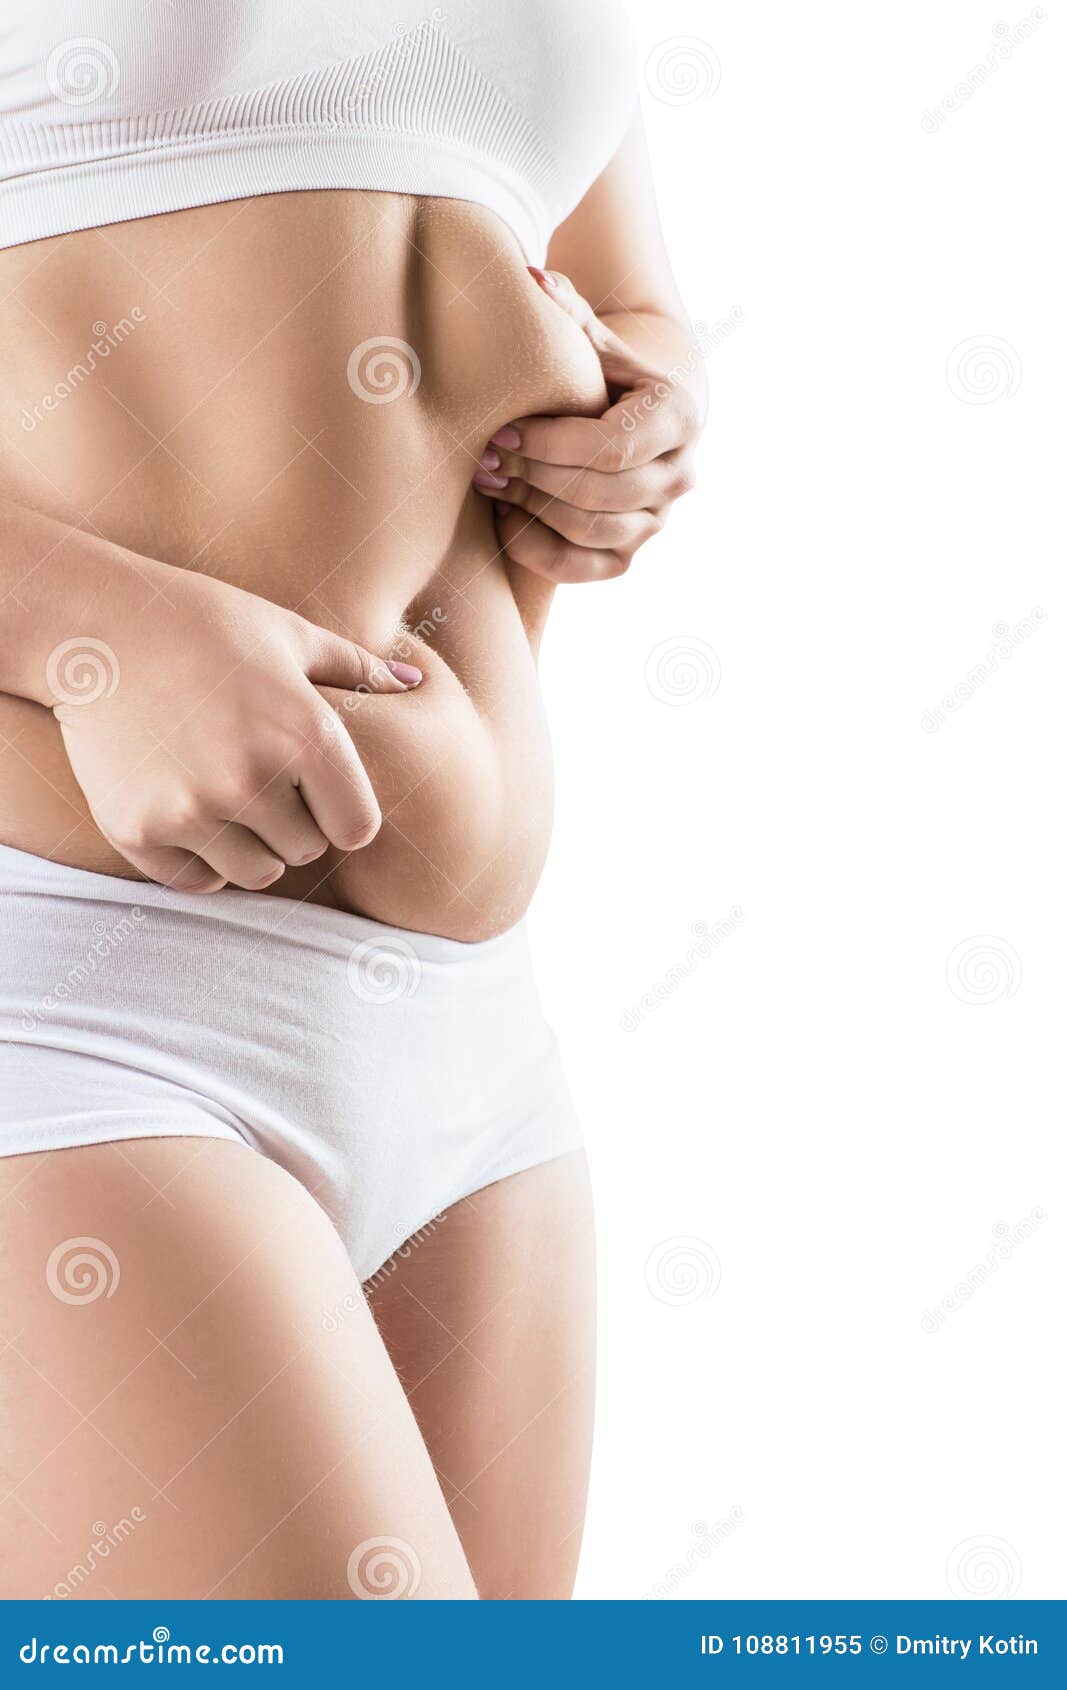 Woman in White Underwear Holds Belly Fat. Stock Image - Image of